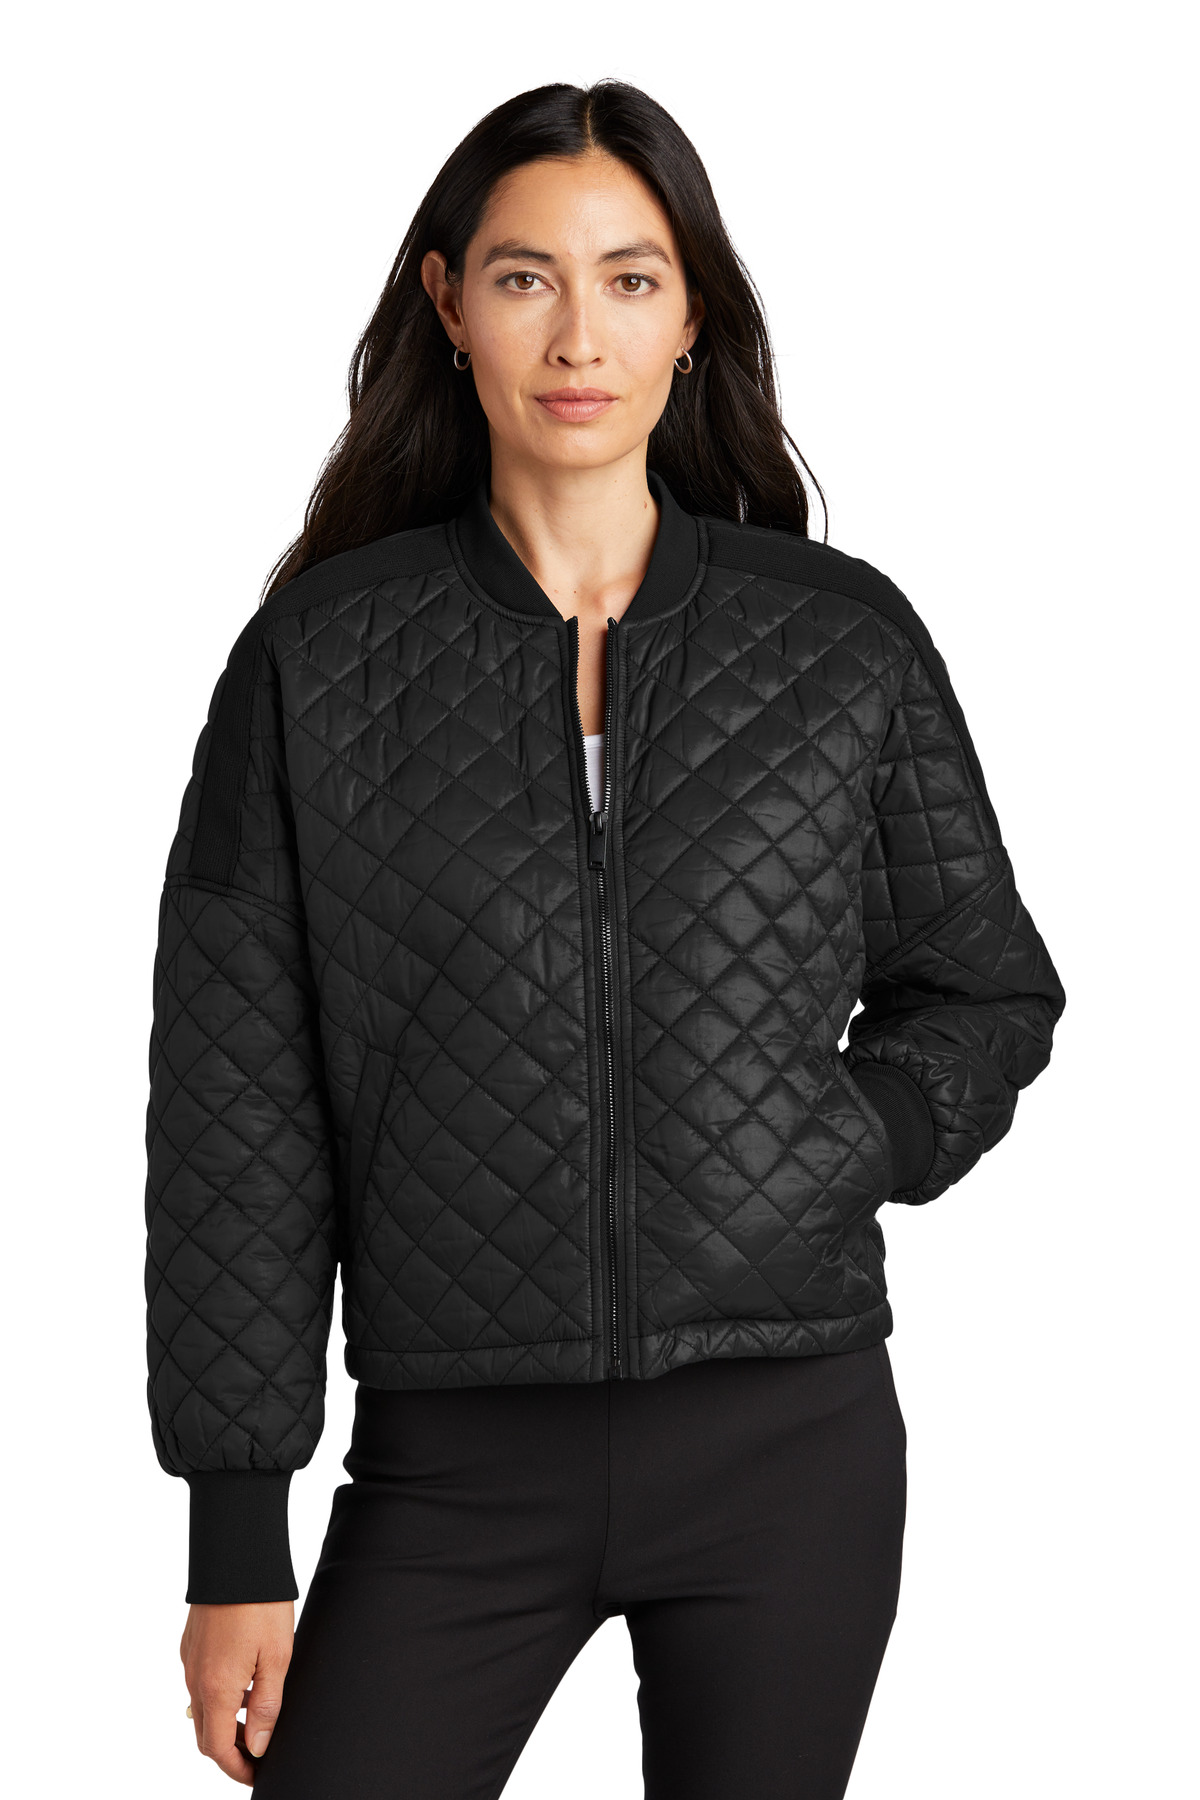 Mercer+Mettle Womens Boxy Quilted Jacket MM7201